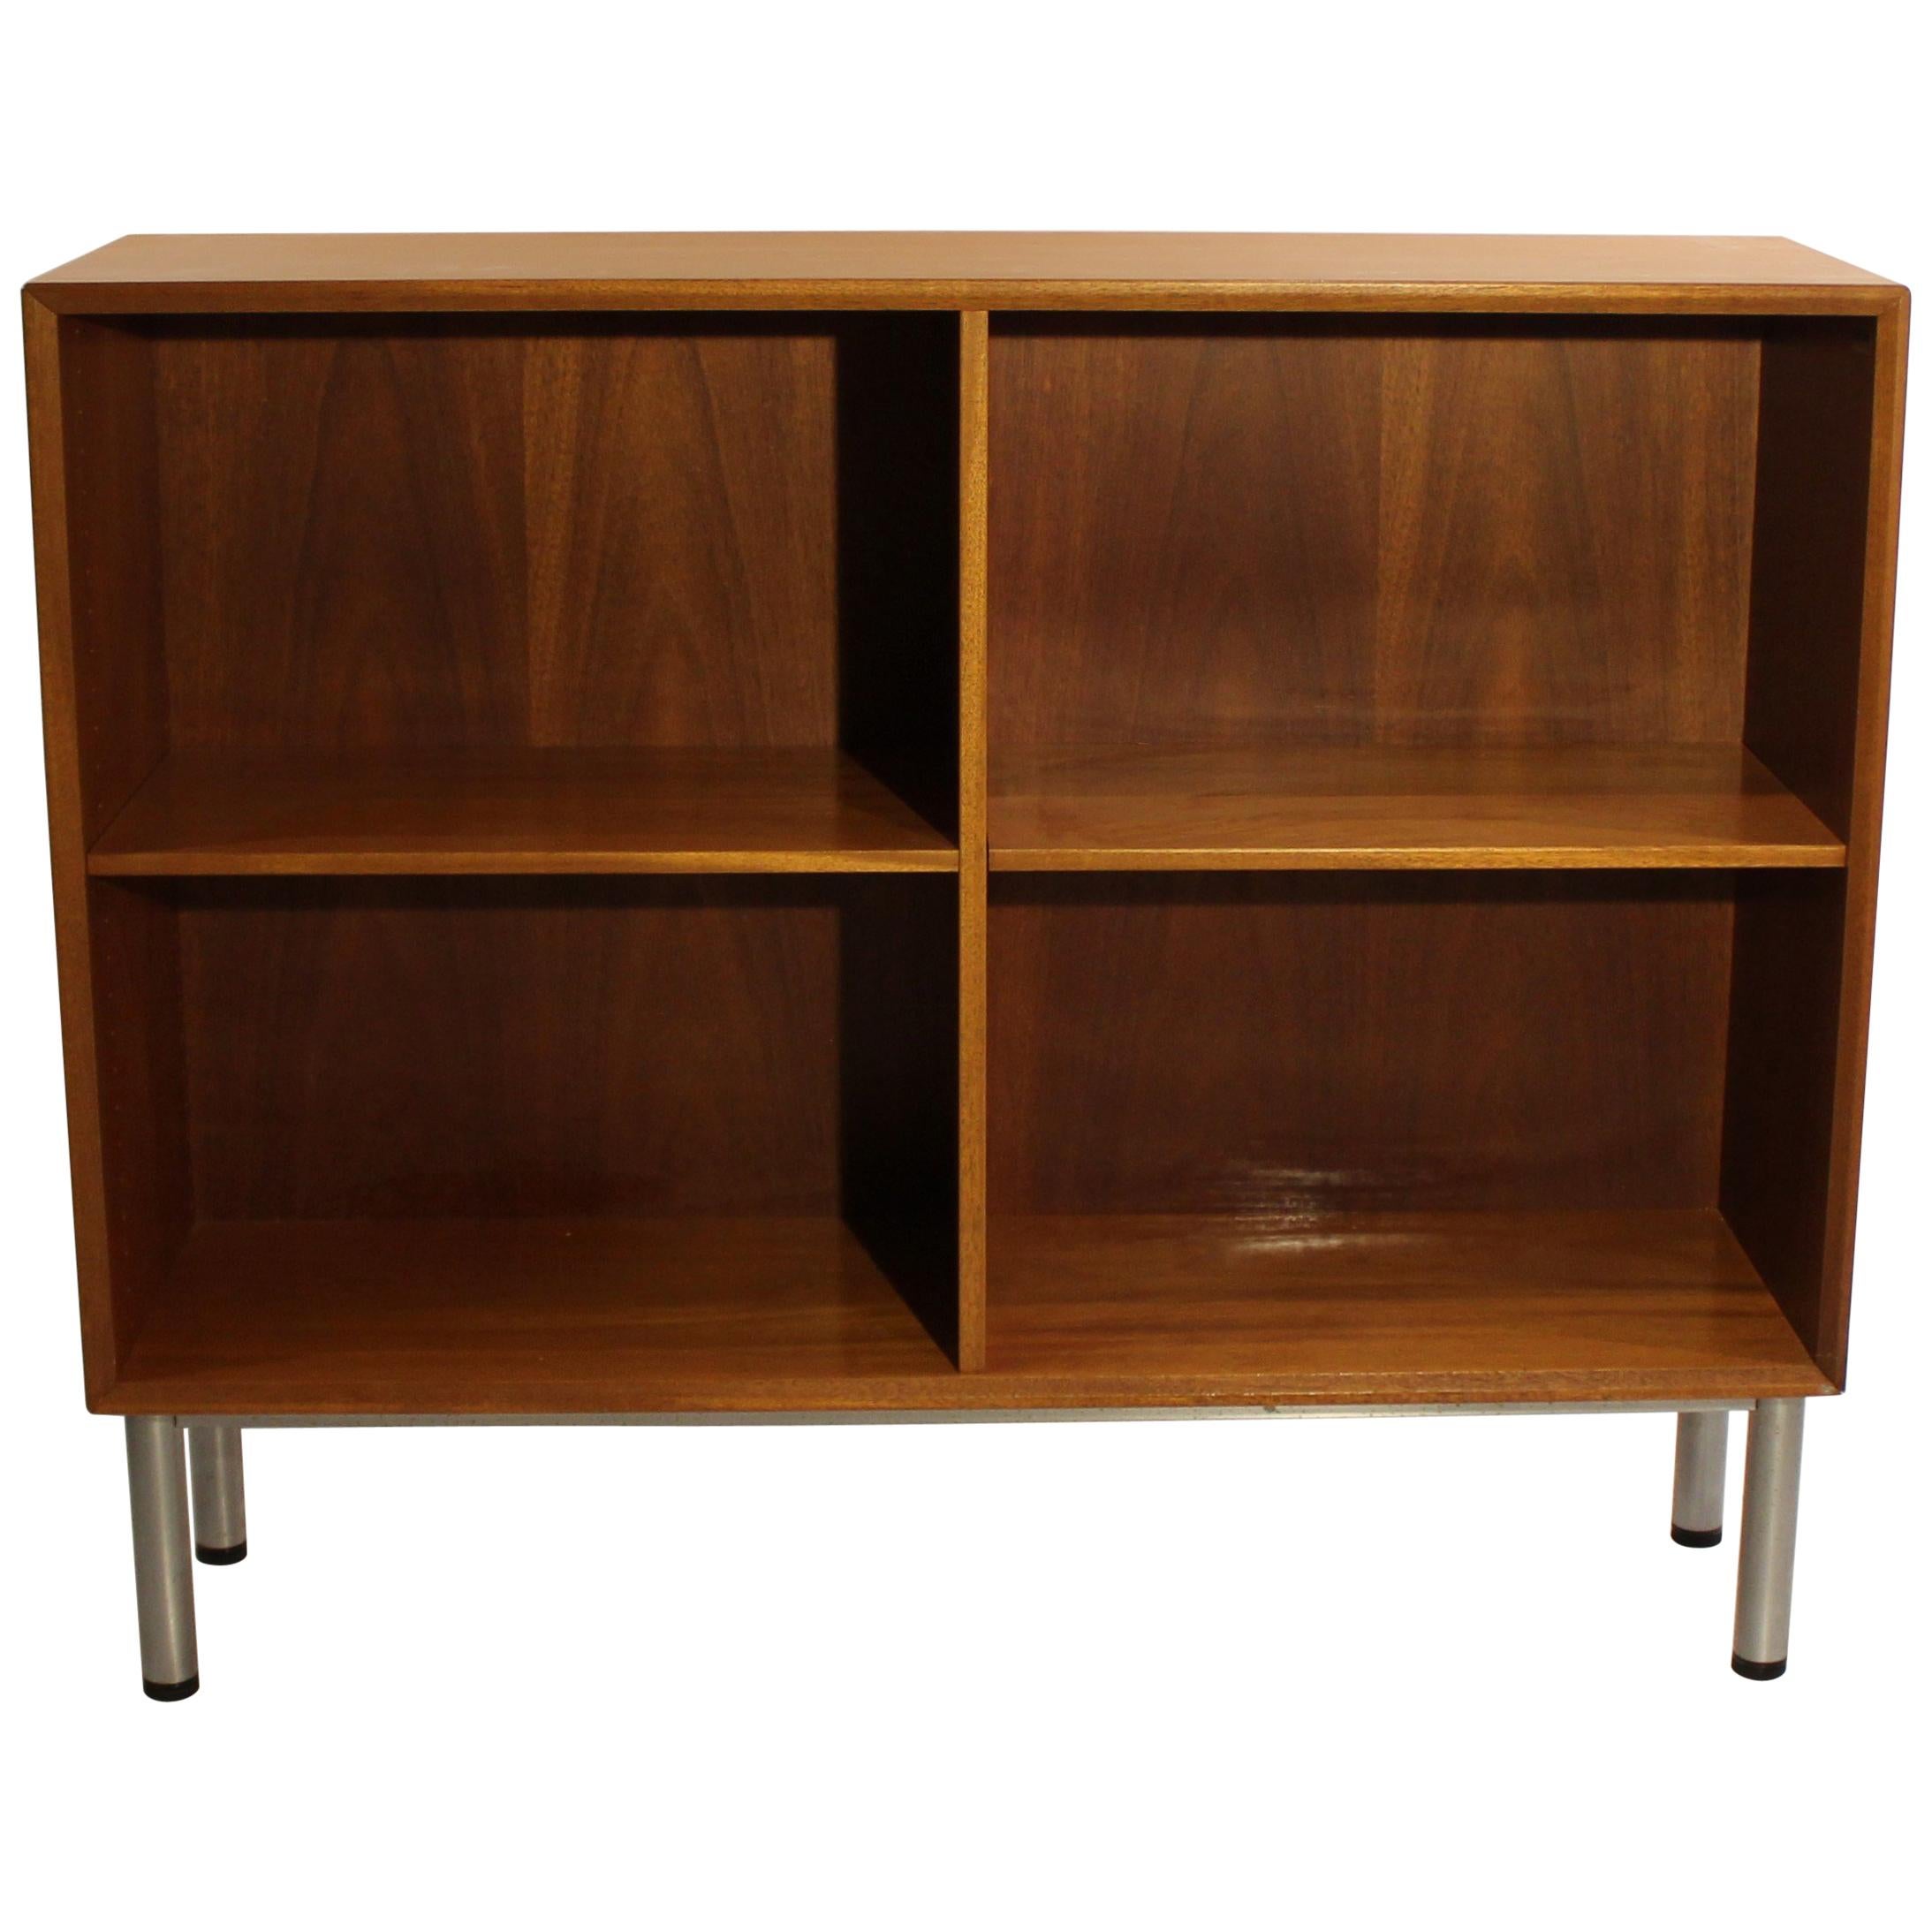 Bookcase of Light Mahogany and Danish Design from the 1960s